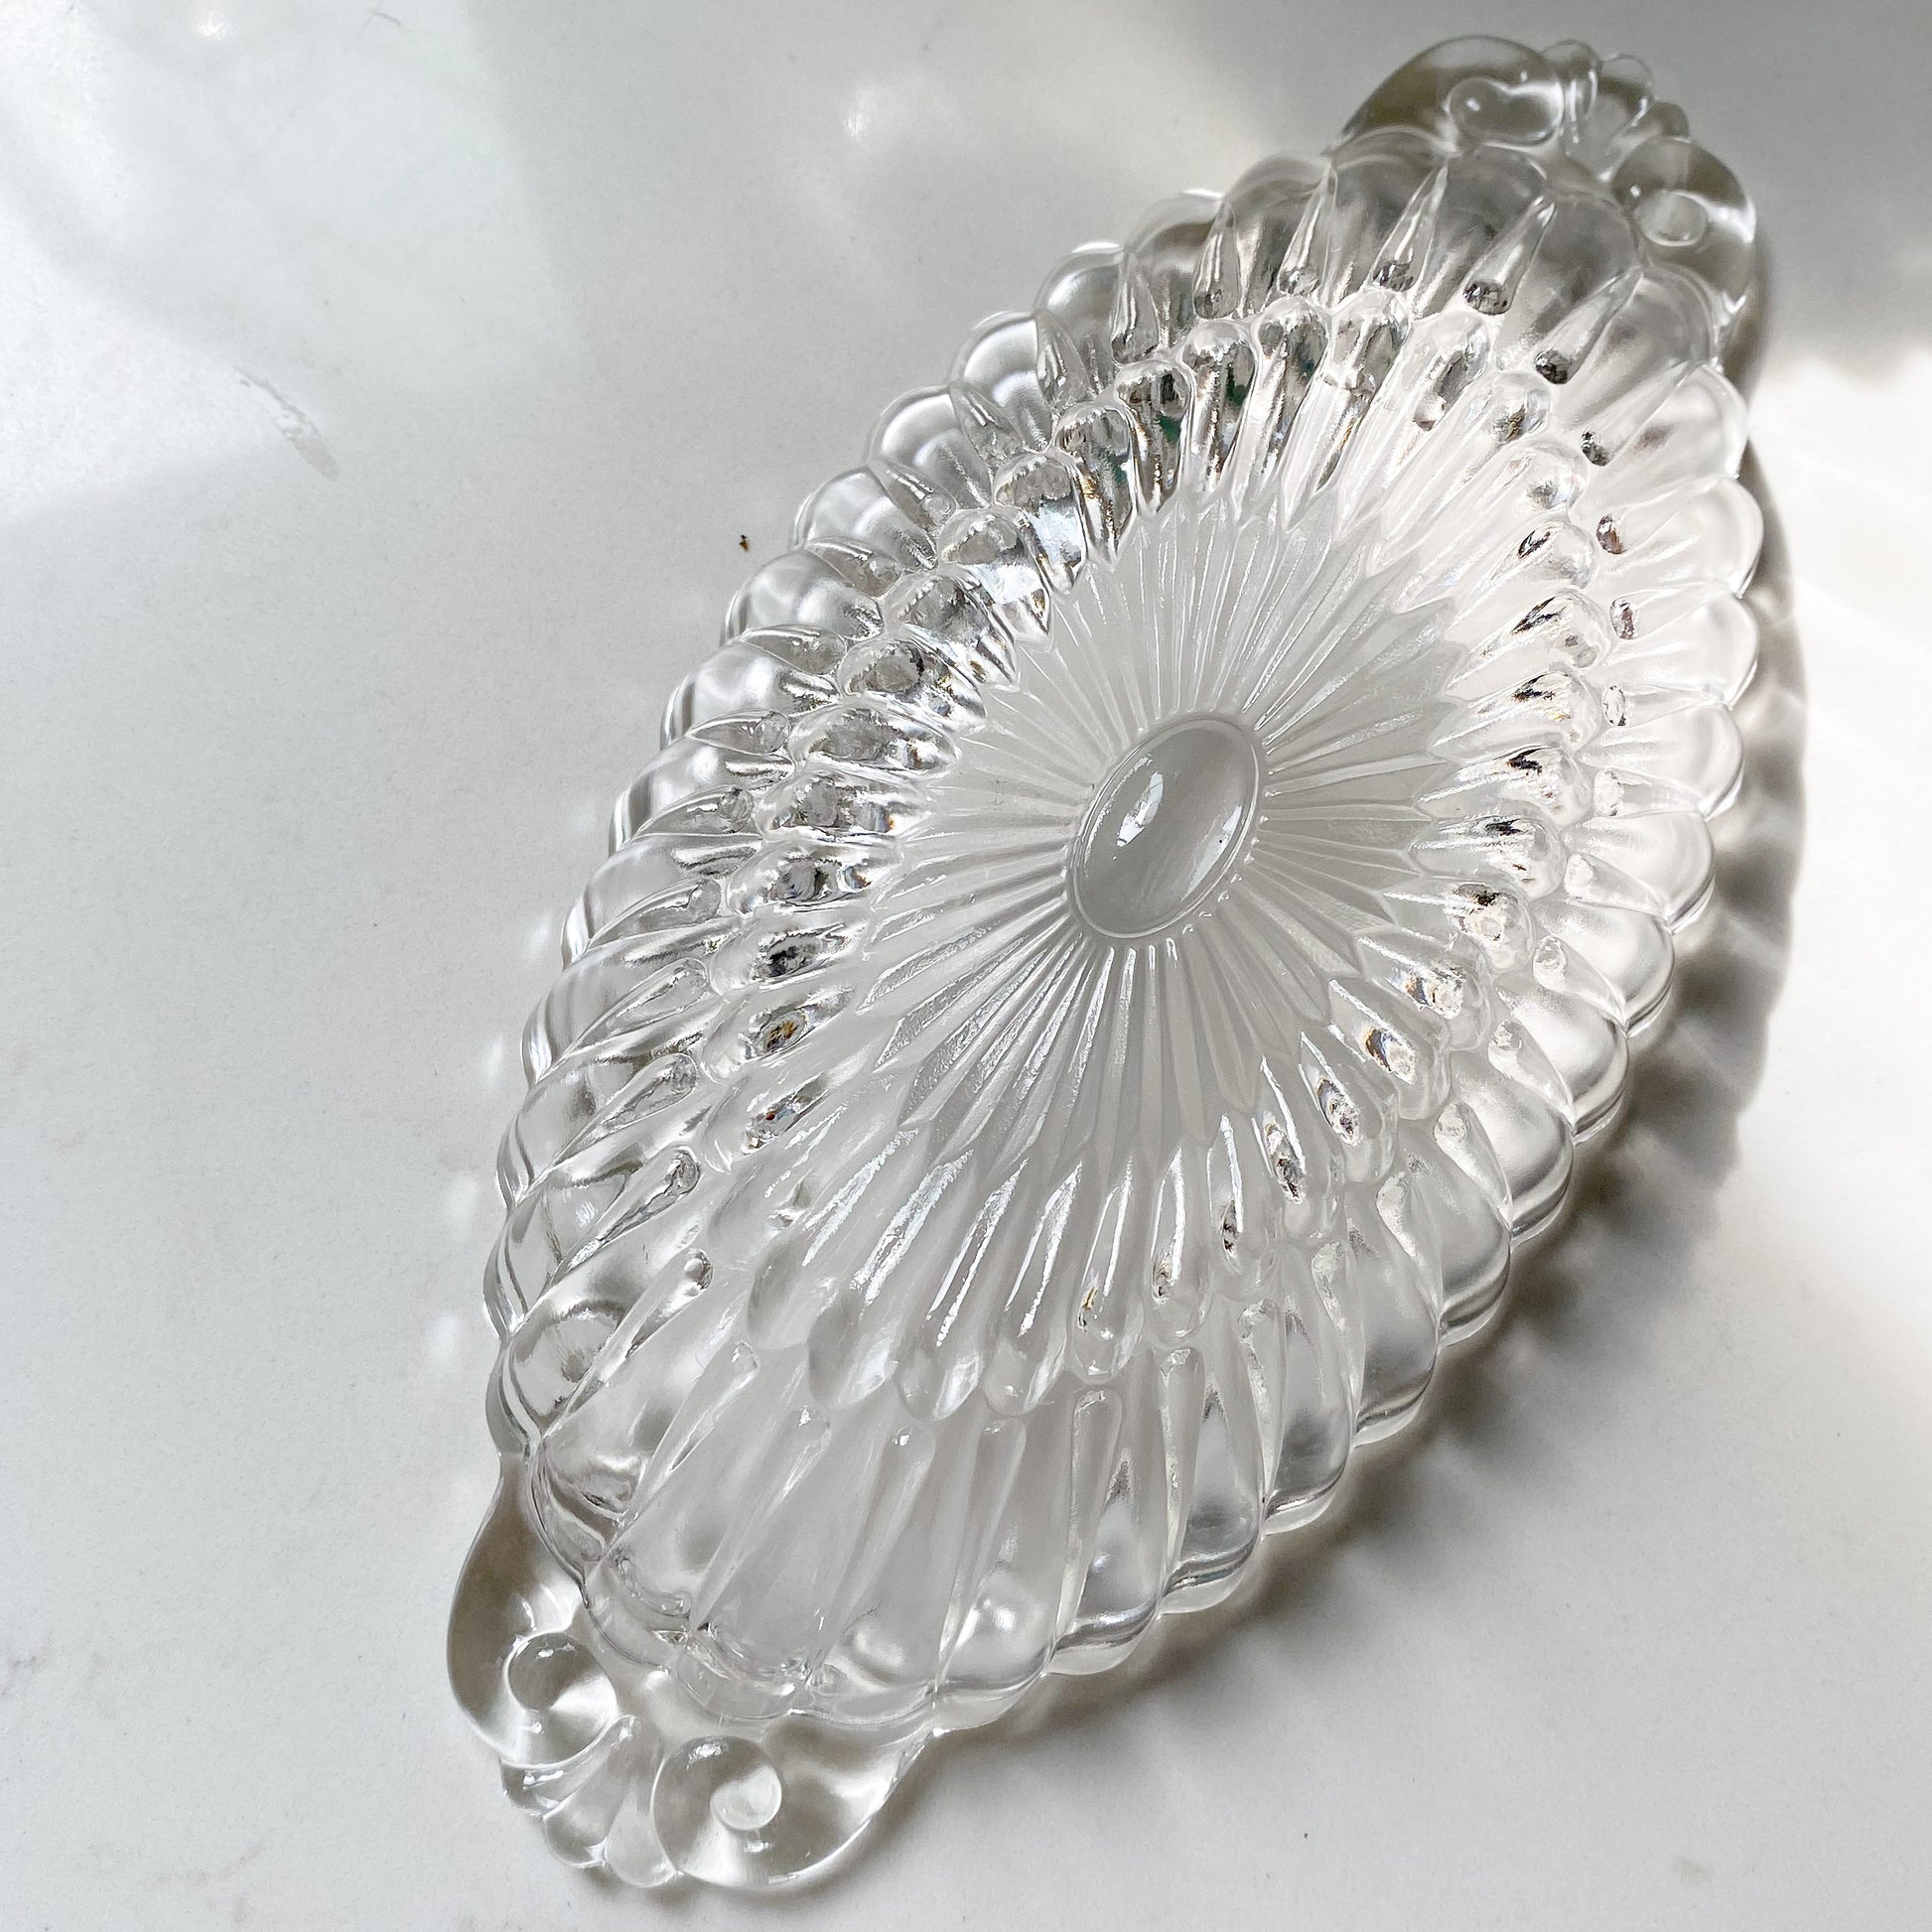 Tropical Sustainable Crystal Dish - Bellestyle